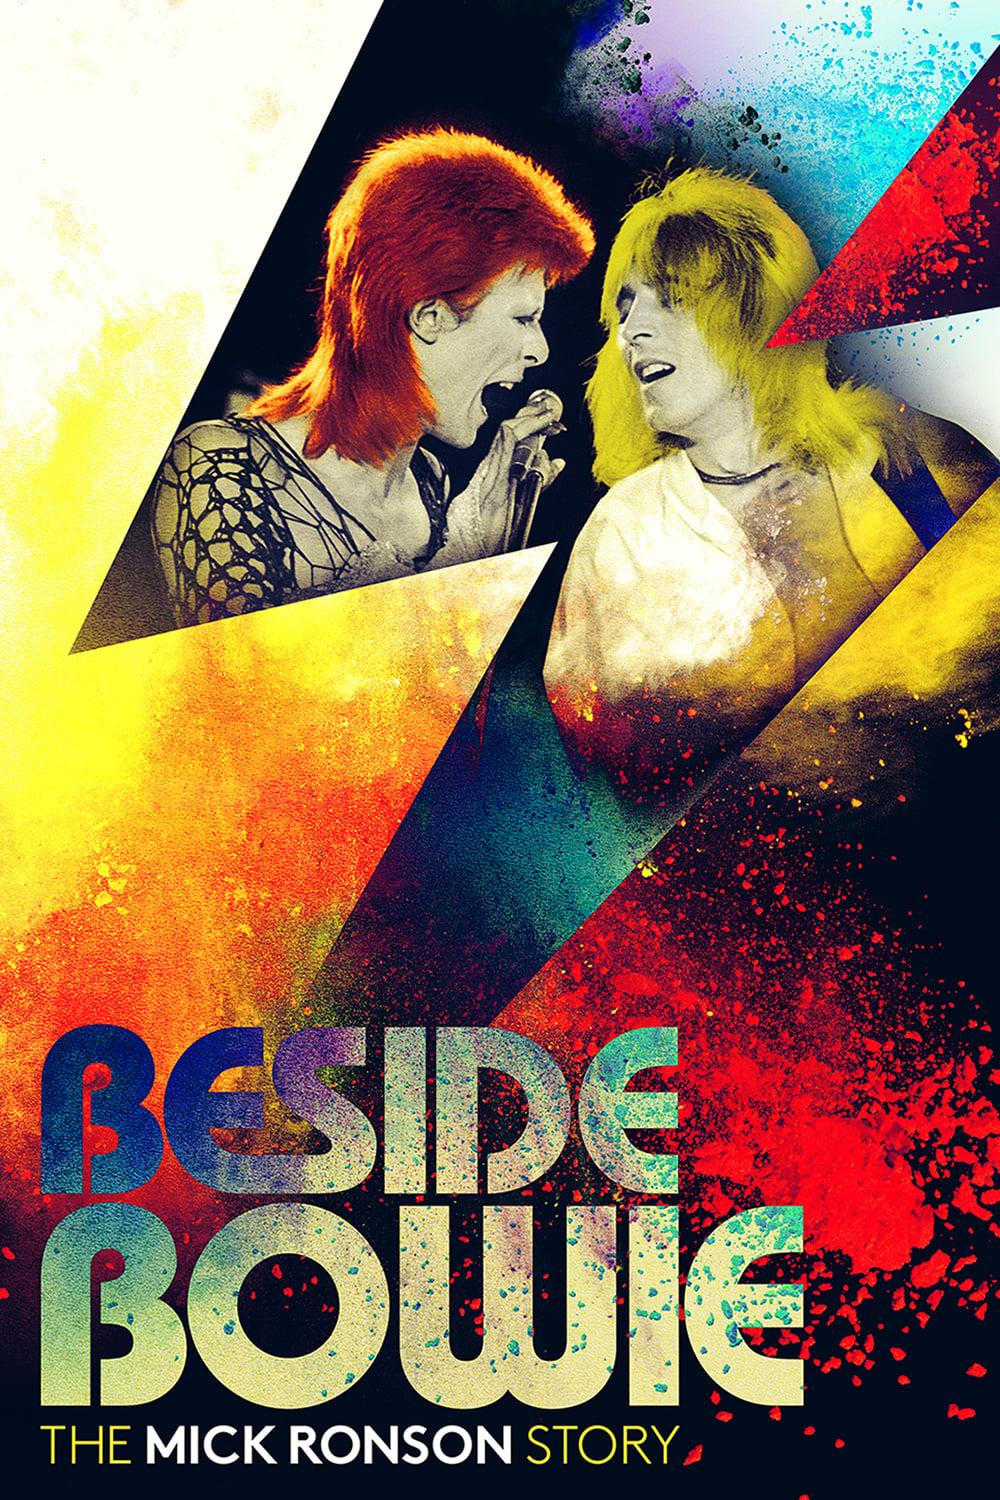 Beside Bowie: The Mick Ronson Story poster